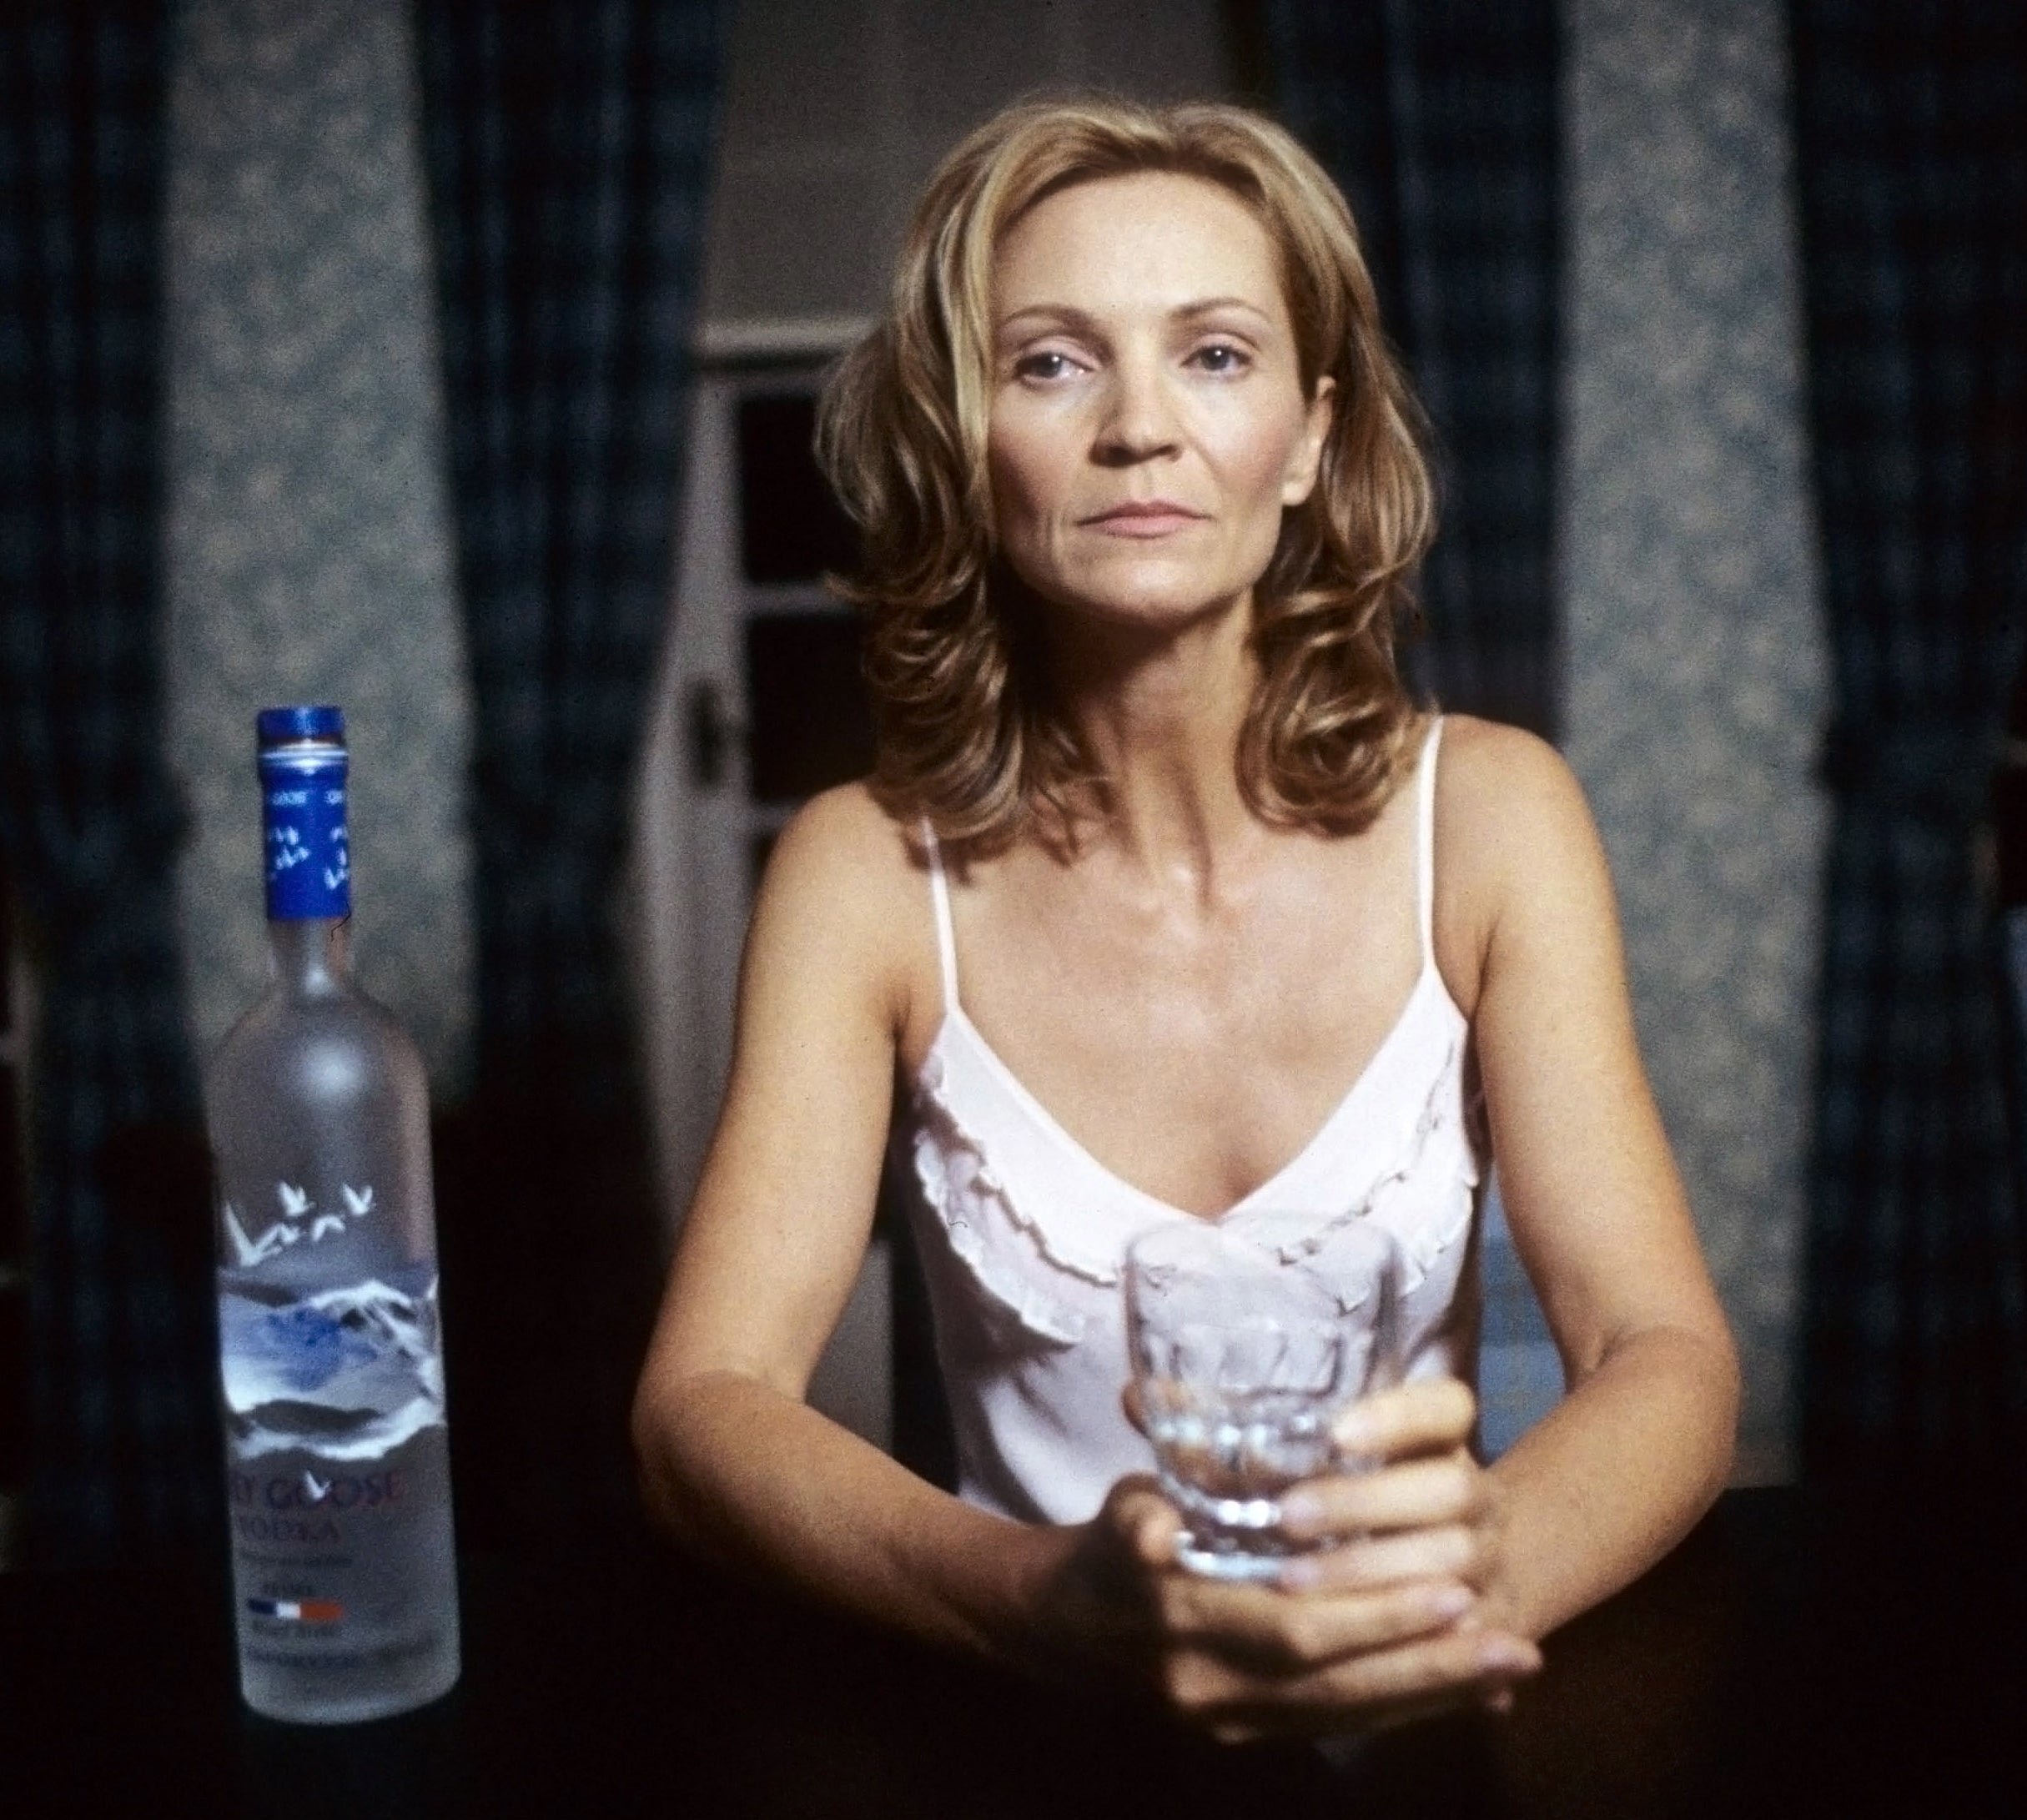 Closeup of a woman with a drink in her hand and a bottle of vodka next to her